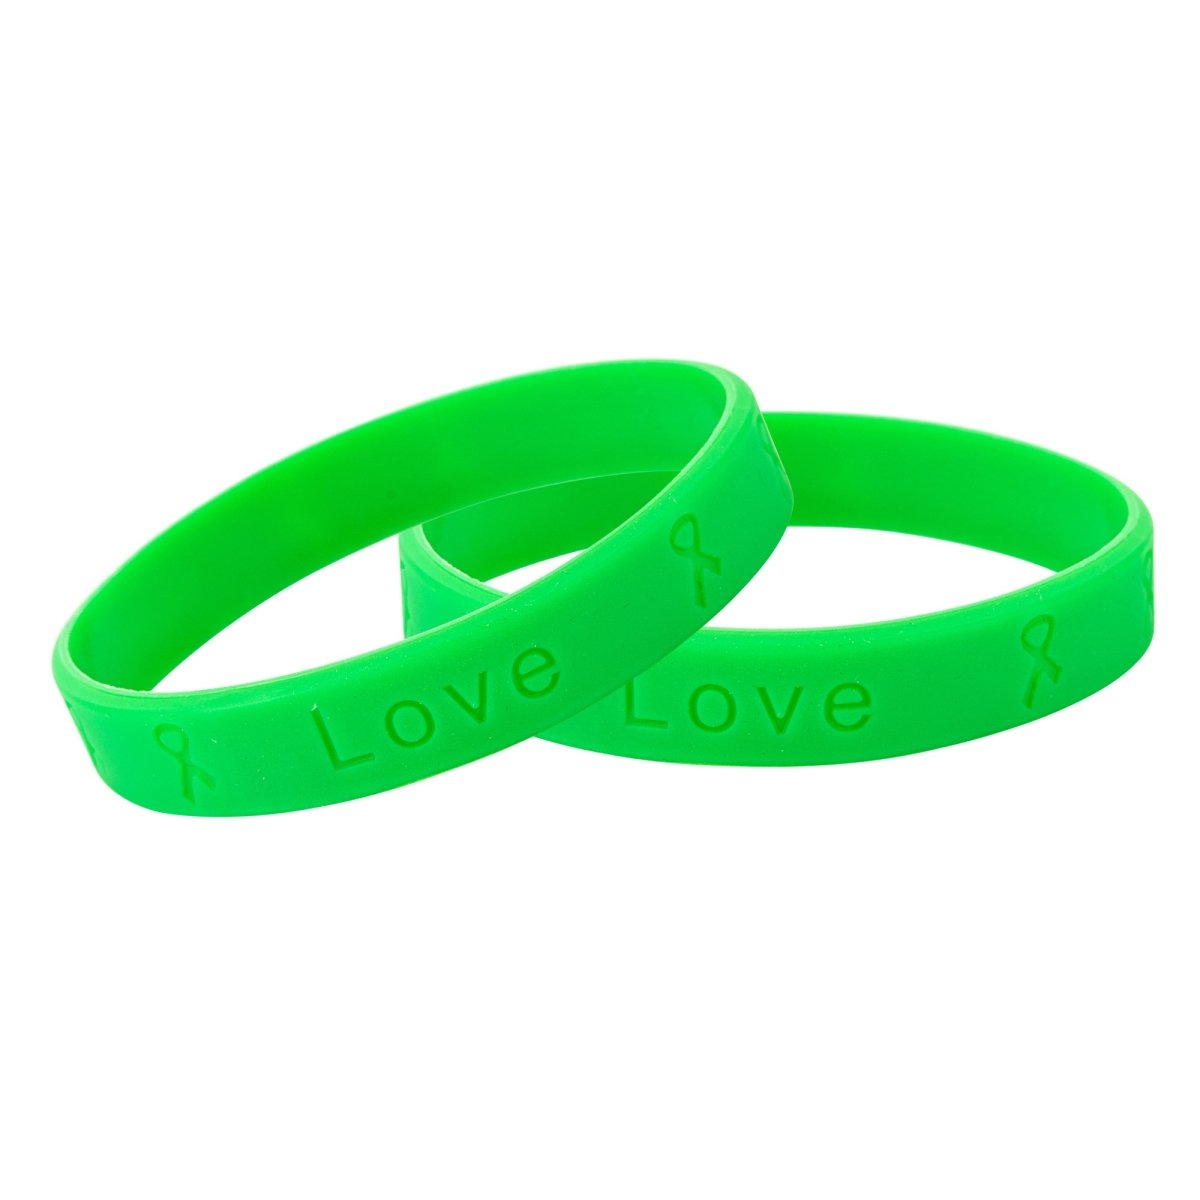 Adult Cerebral Palsy Awareness Silicone Bracelet Wristbands - Fundraising For A Cause